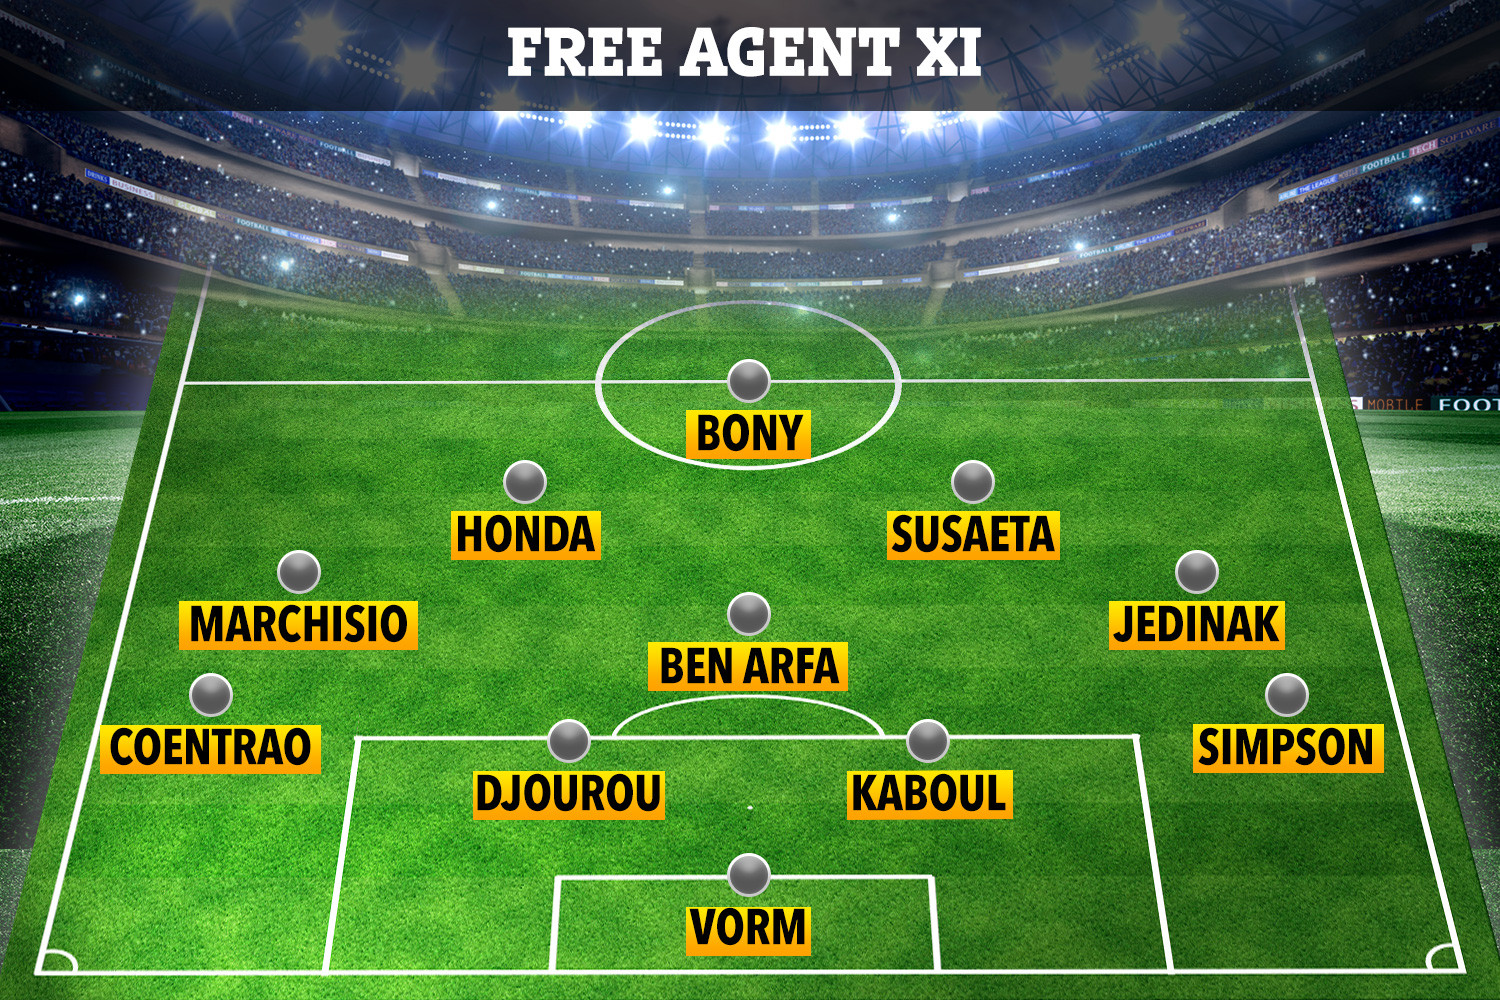 SPORT-PREVIEW-TEAM-LINE-UP-FREE-AGENT-XI.jpg